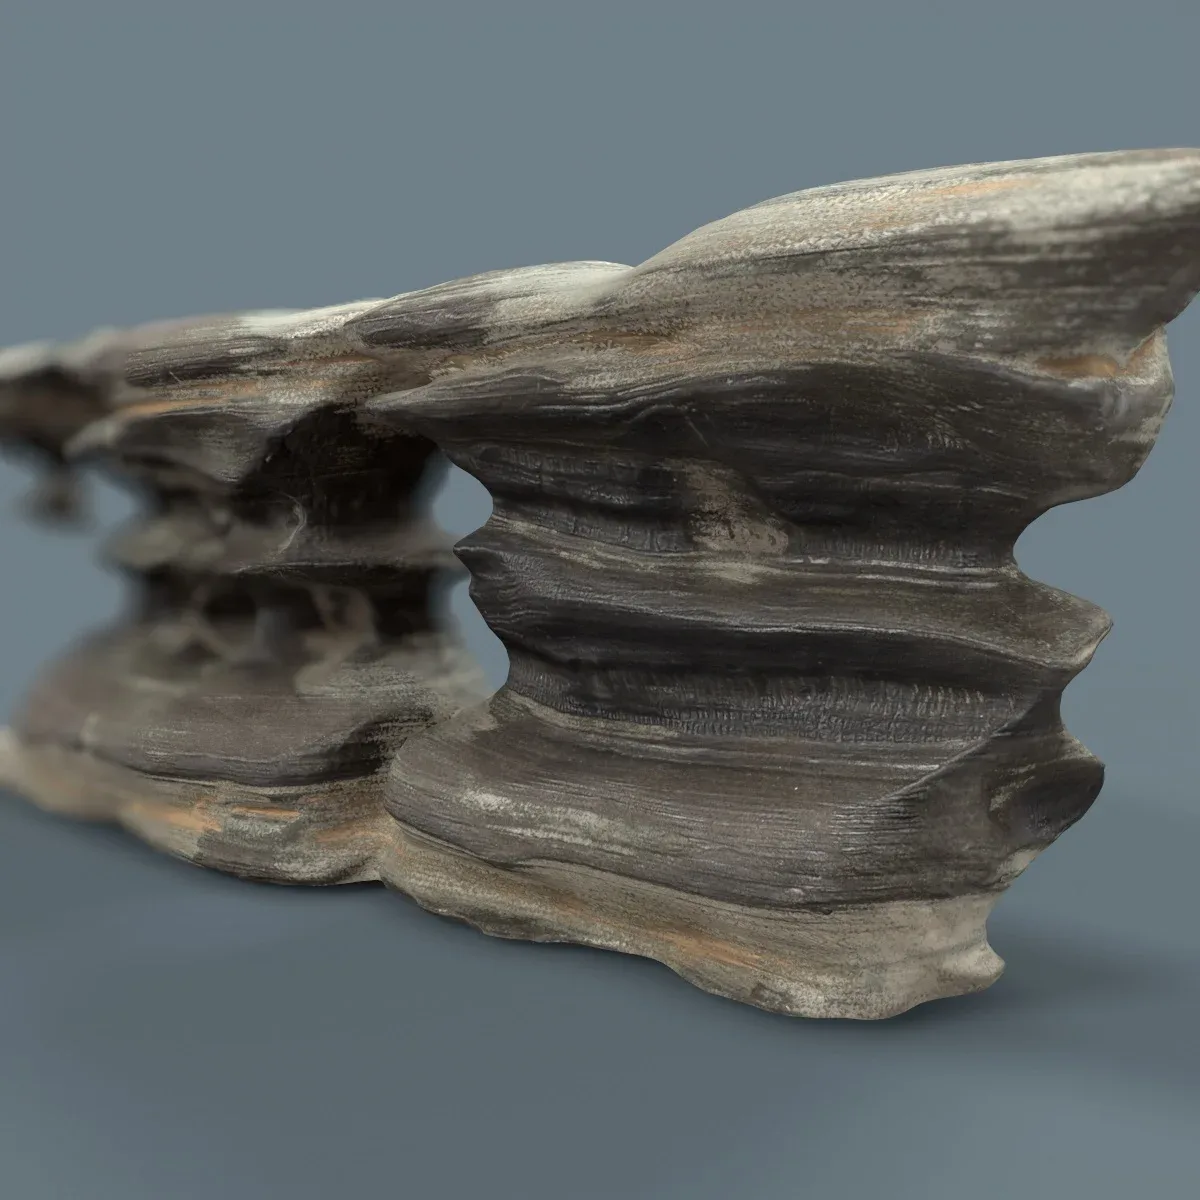 Suiseki Stone 27 from Japan - High-Quality 3D Model with Metallic-Roughness PBR Textures for Games, VR, and Art Projects